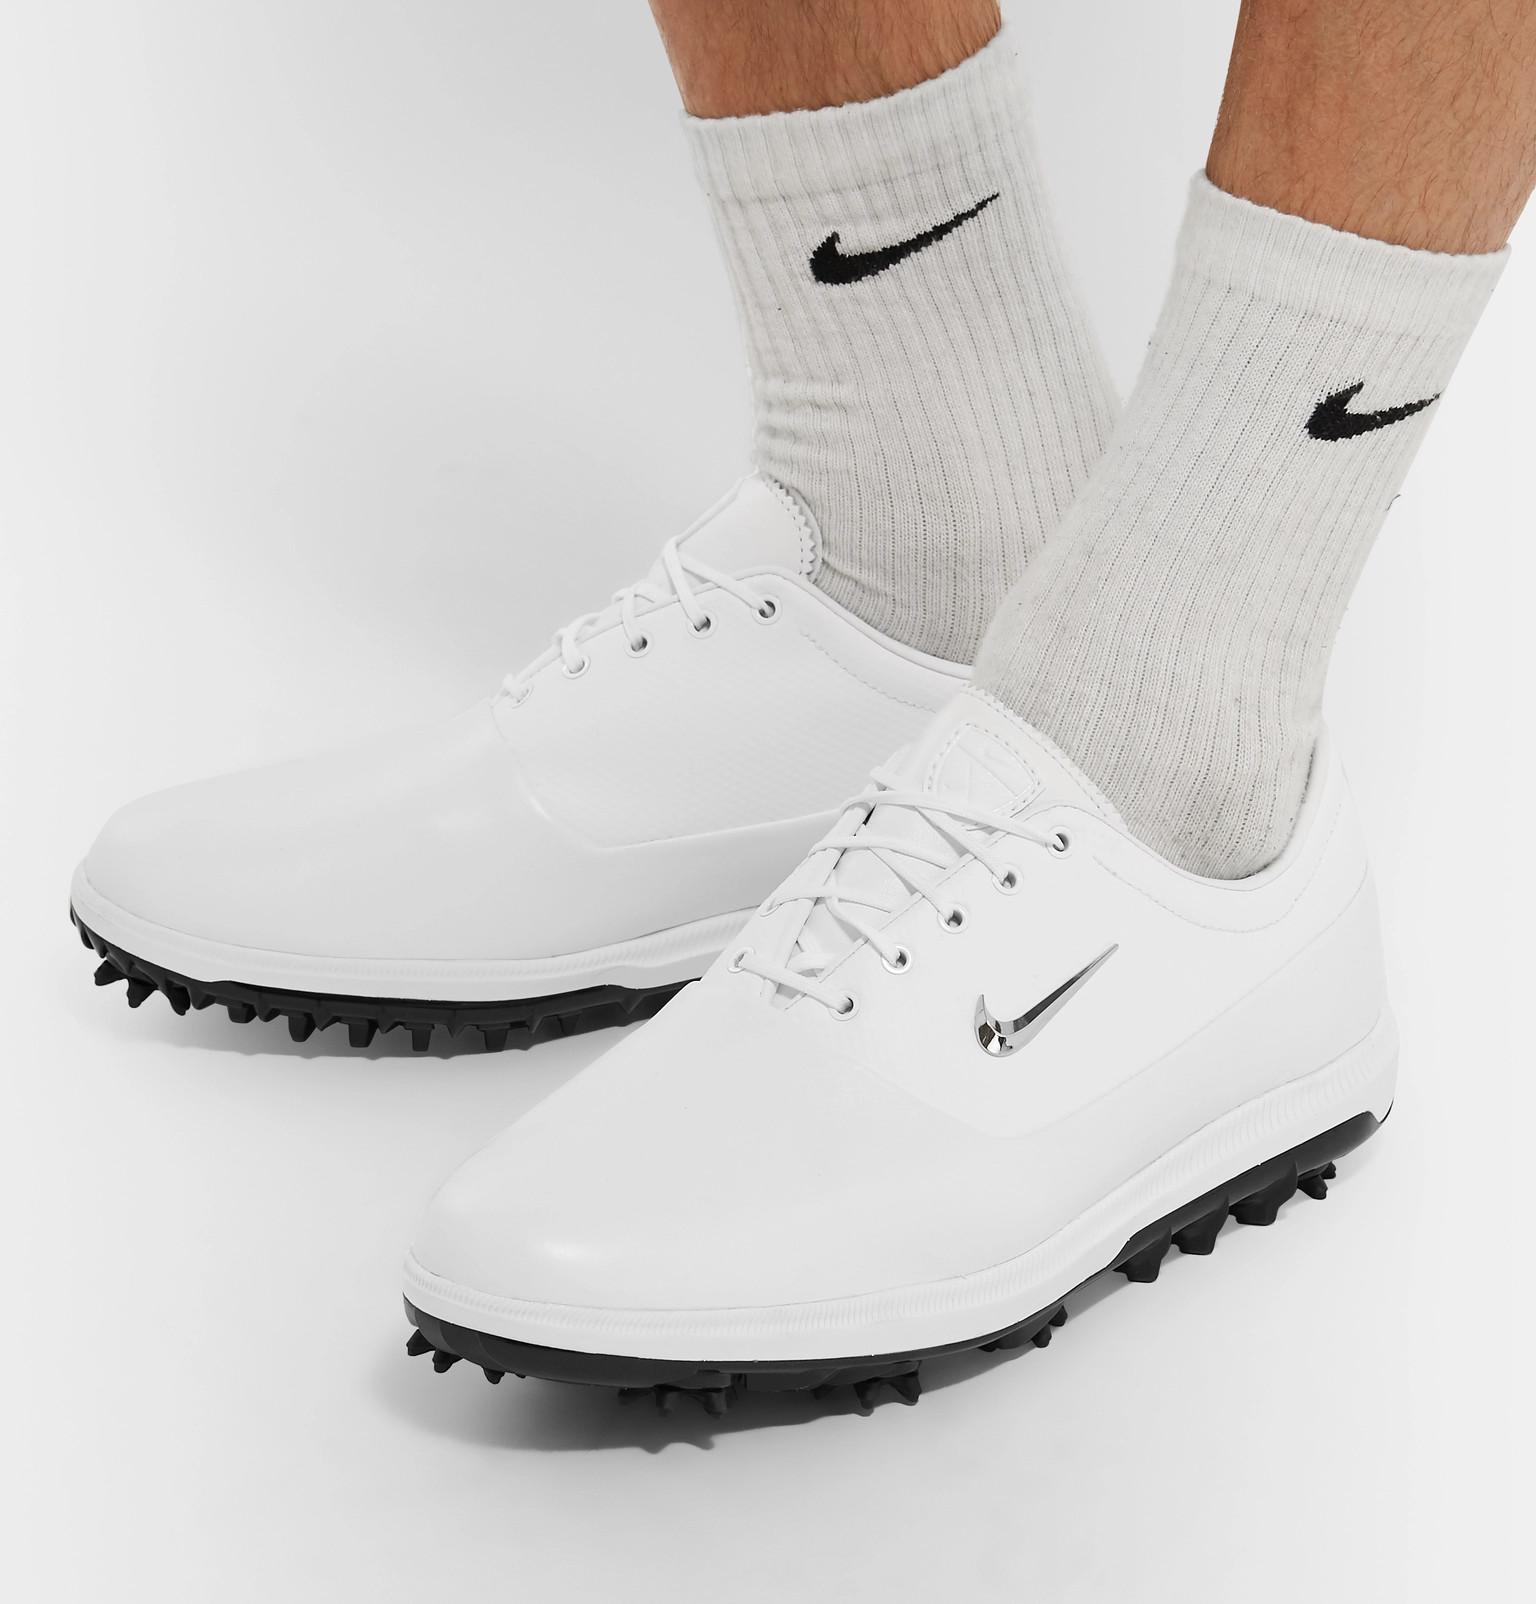 Nike Air Zoom Victory Tour Golf Shoe in White for Men - Lyst